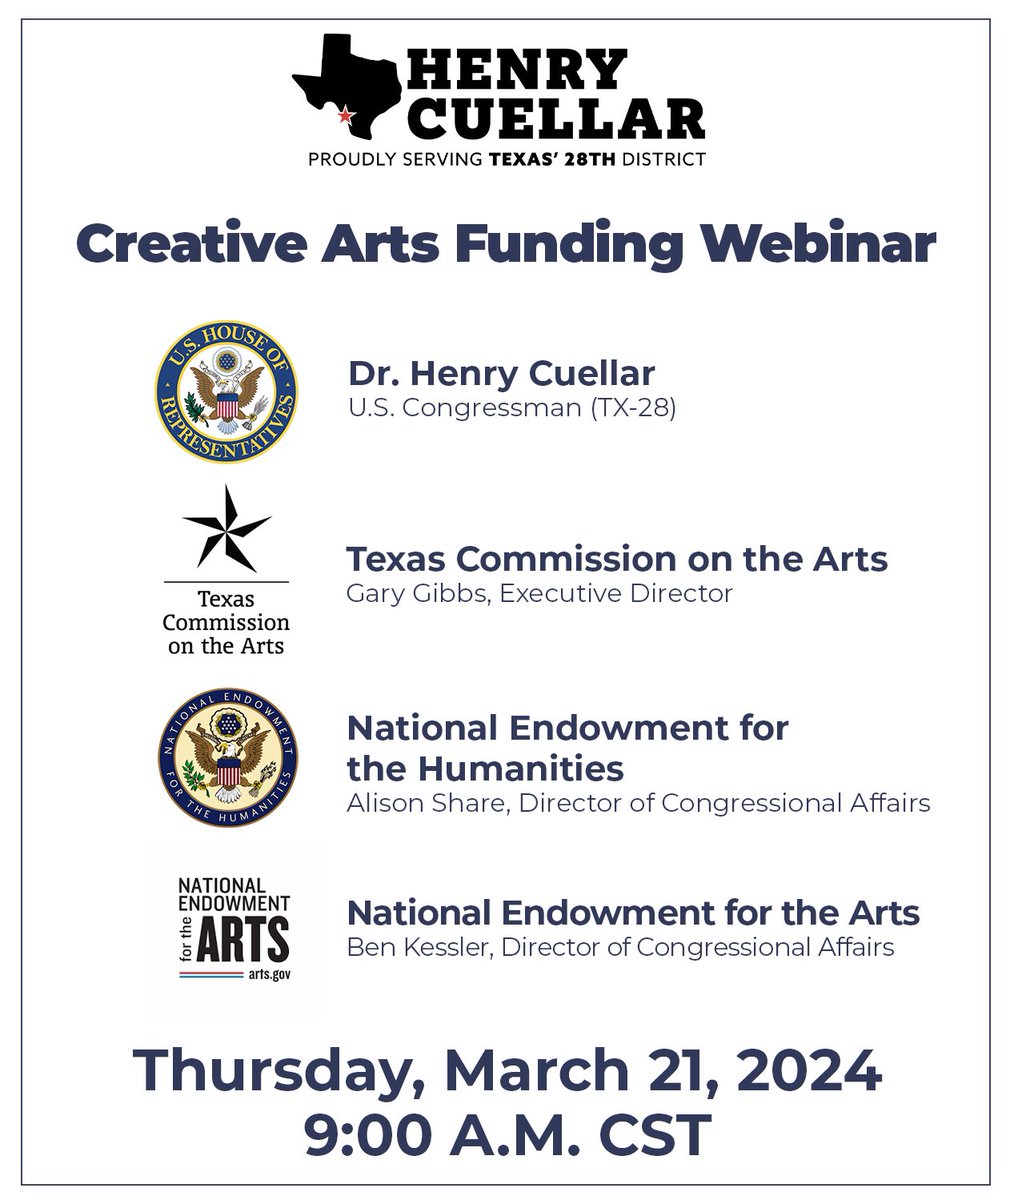 On Thursday, March 21, 2024, at 9:00 A.M. CST, I will host a webinar on funding opportunities for the creative arts. Please join me and representatives from @NEAarts, @NEHgov, and @TXCommArts. To register for the webinar, click the link below: tinyurl.com/5hyaa9wb If you…